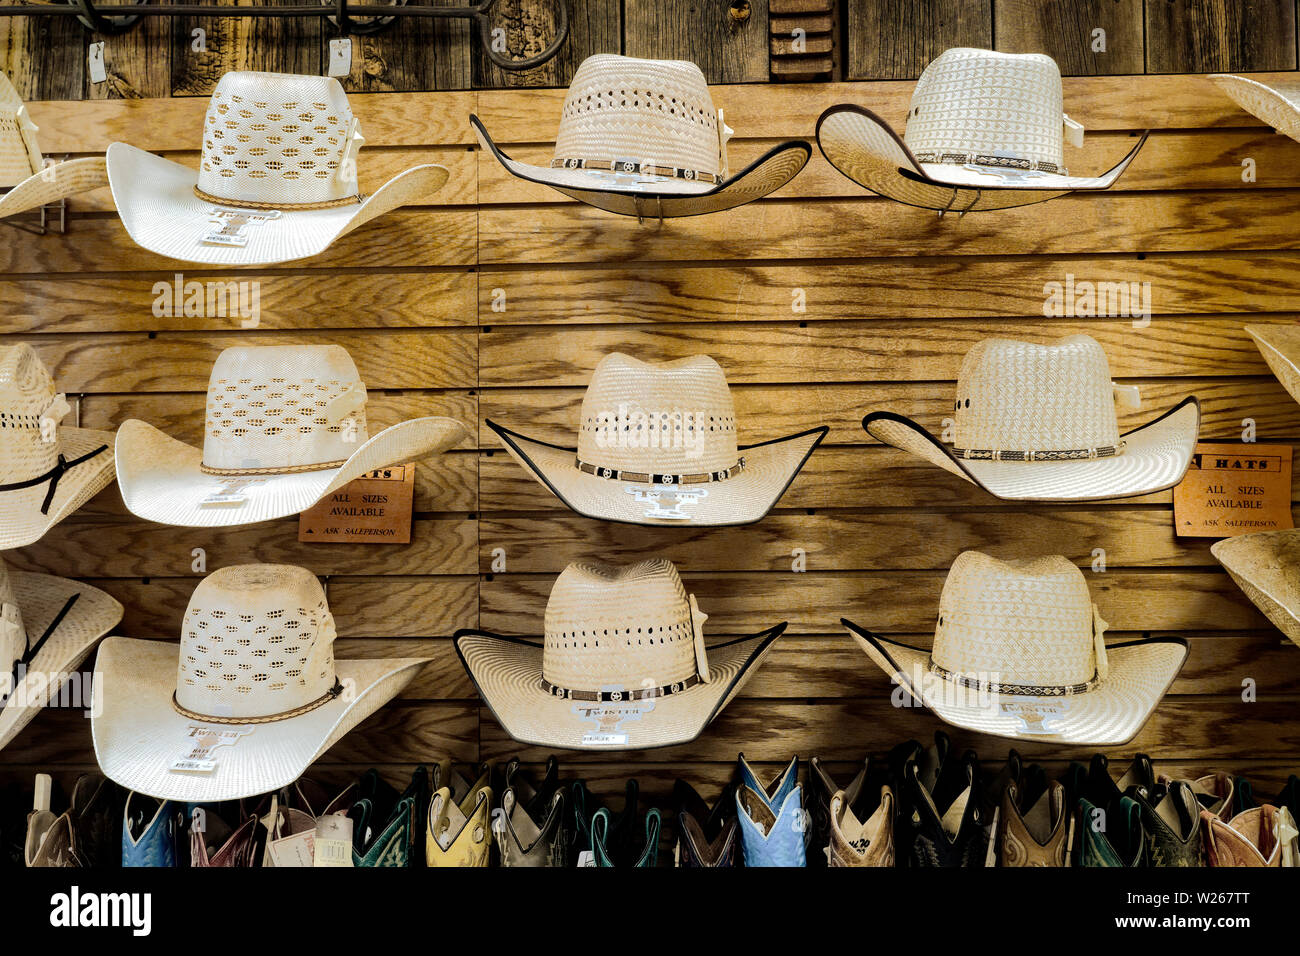 Cowboy Hats In Store In Banque d'image et photos - Alamy